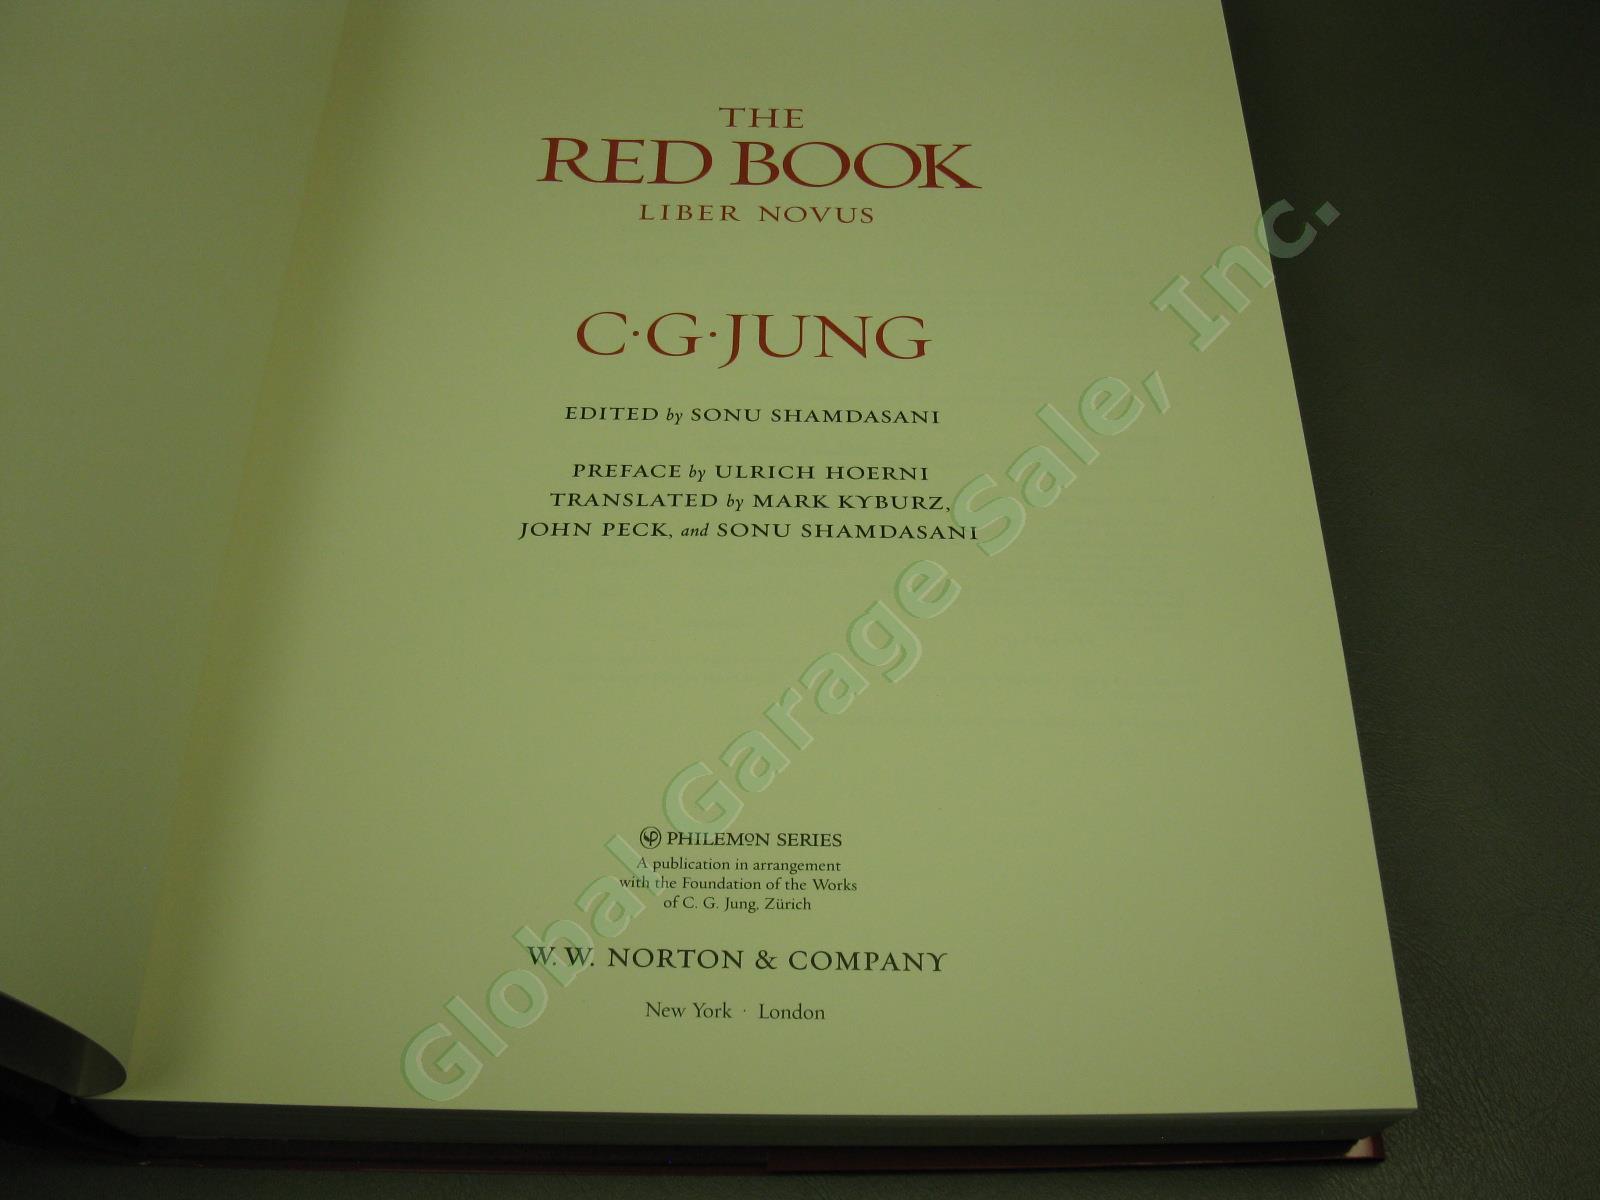 C.G Carl Jung The Red Book Liber Novus 2009 First Edition Hardcover +Dust Jacket 4